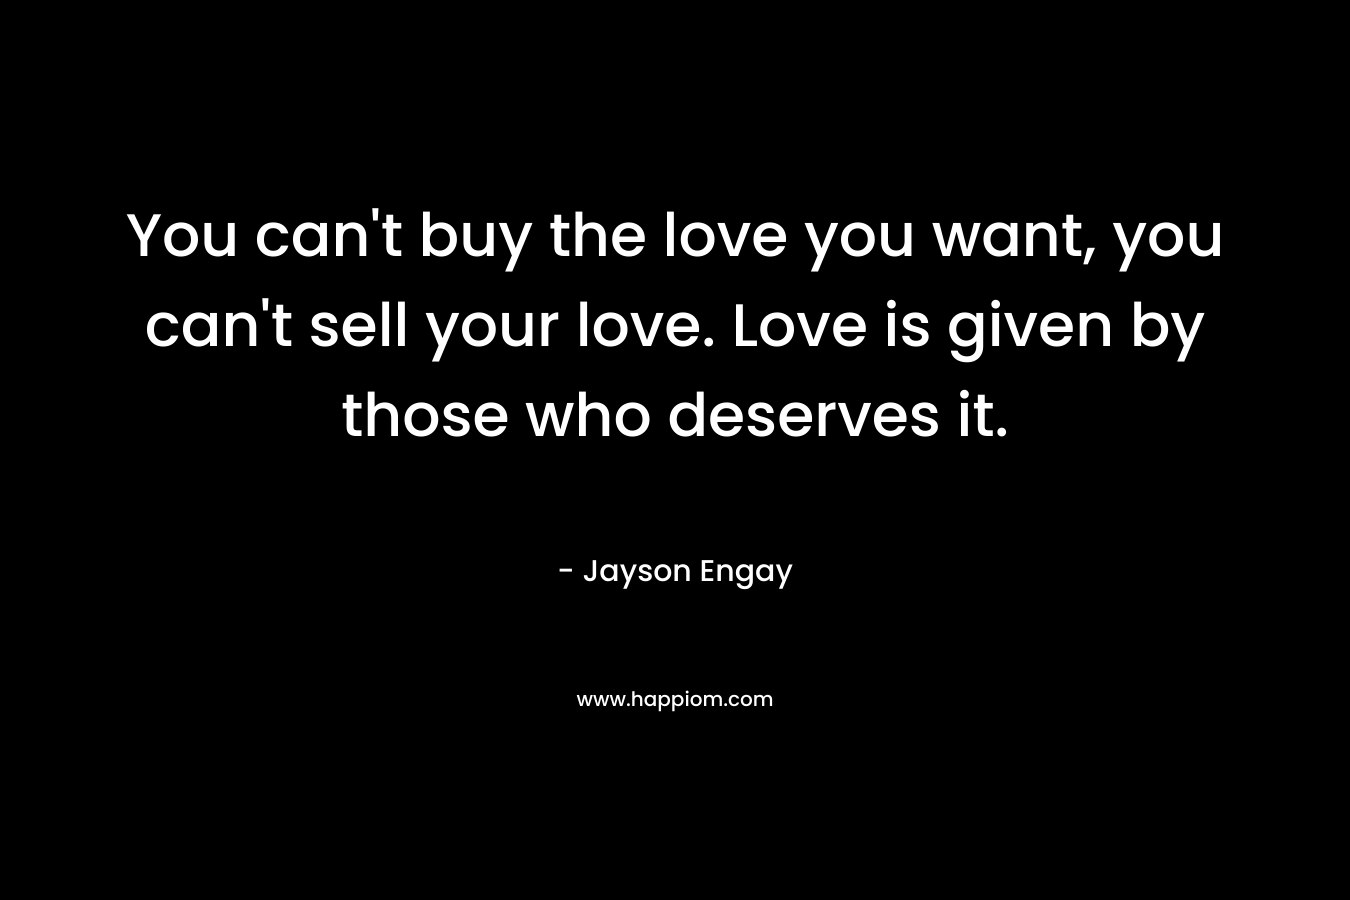 You can't buy the love you want, you can't sell your love. Love is given by those who deserves it.